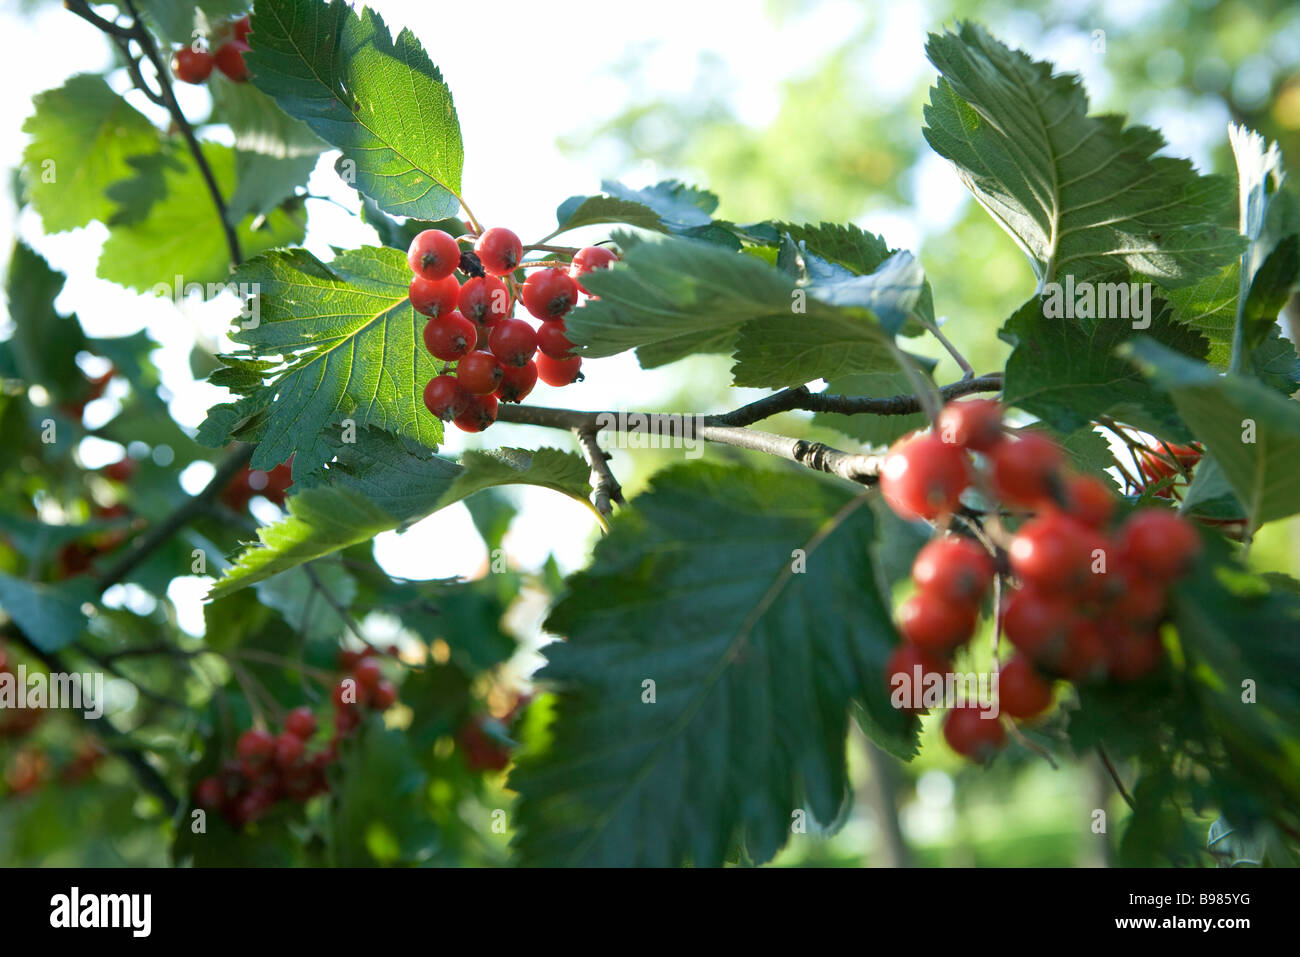 Clusters of red berries growing on a branch Stock Photo